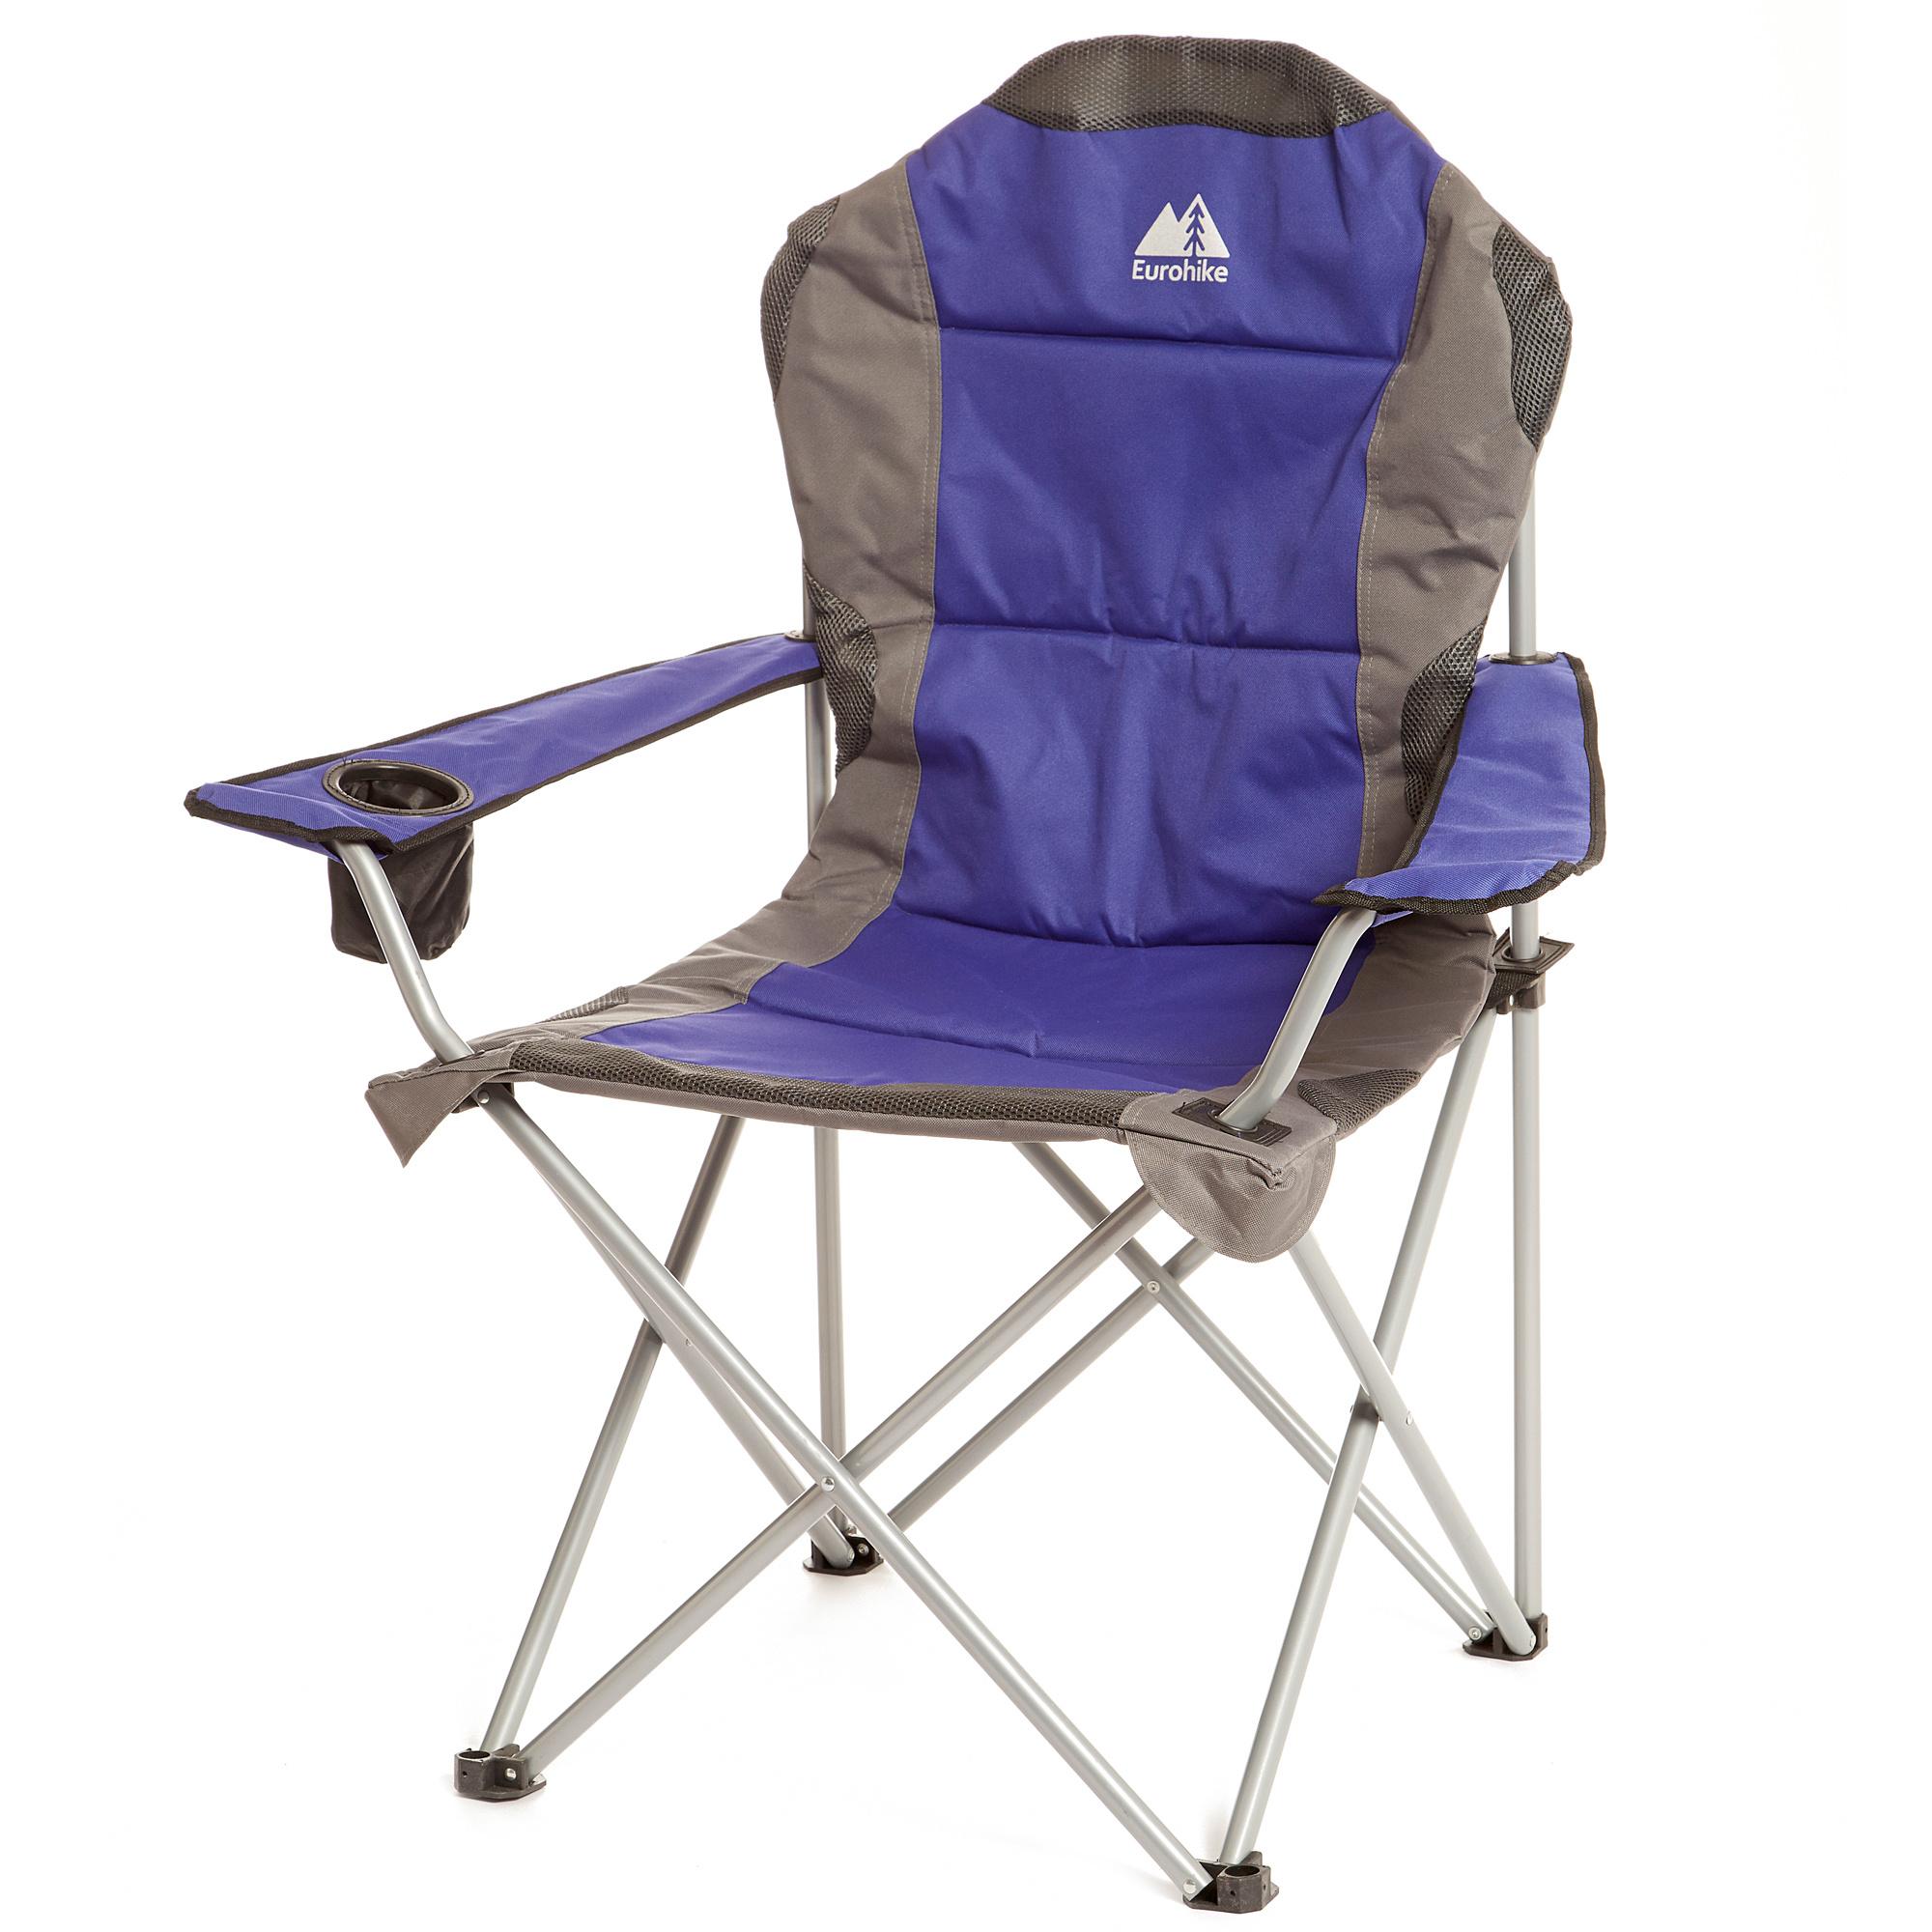 New Eurohike Langdale Deluxe Camping Furniture Folding Chair